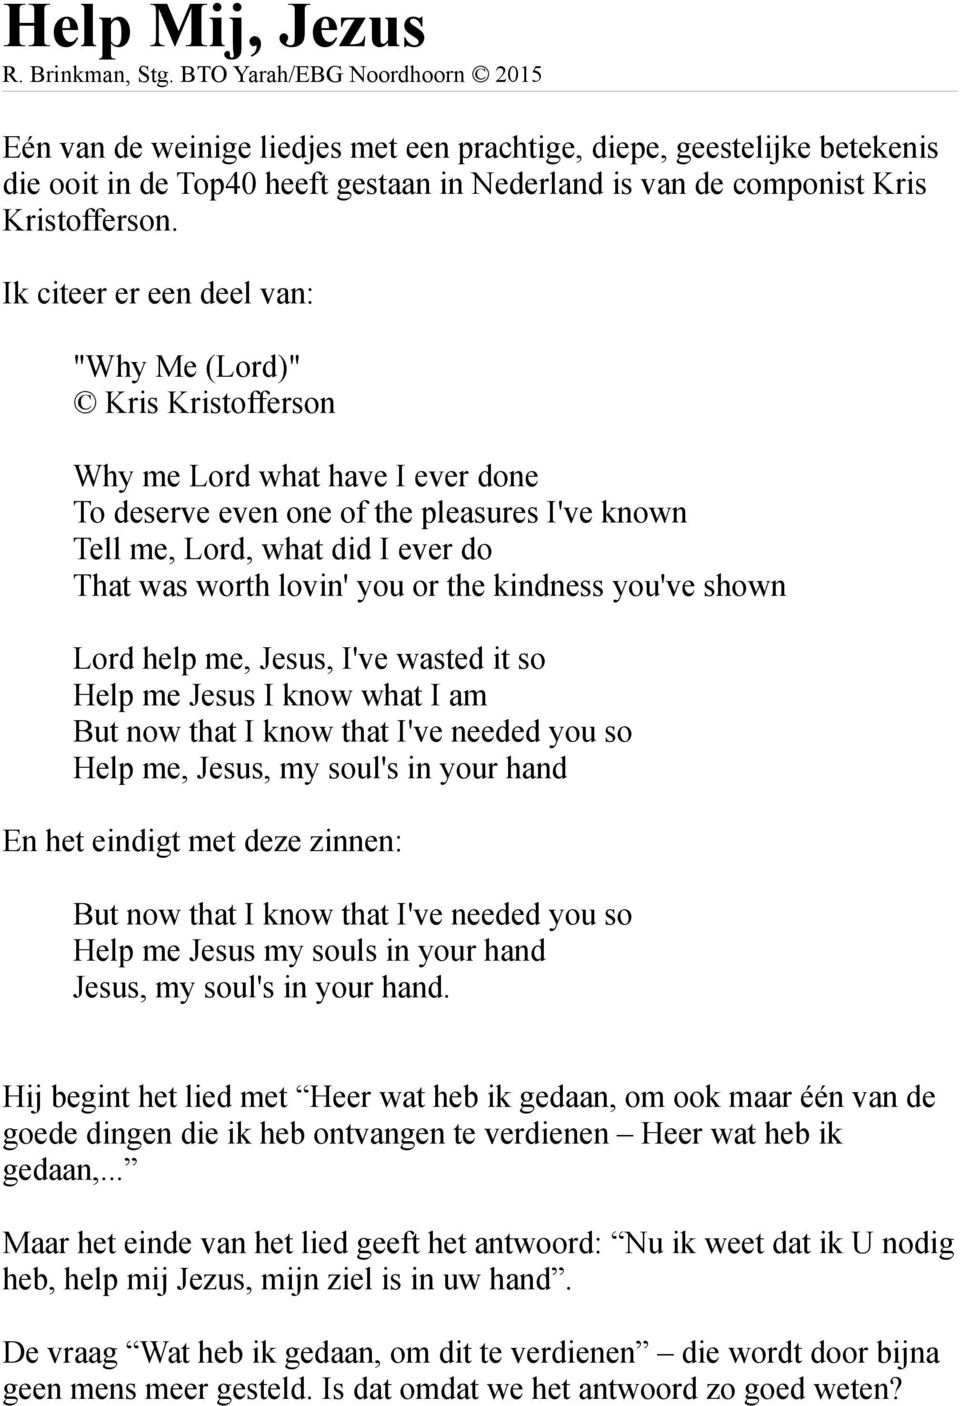 Ik citeer er een deel van: "Why Me (Lord)" Kris Kristofferson Why me Lord what have I ever done To deserve even one of the pleasures I've known Tell me, Lord, what did I ever do That was worth lovin'